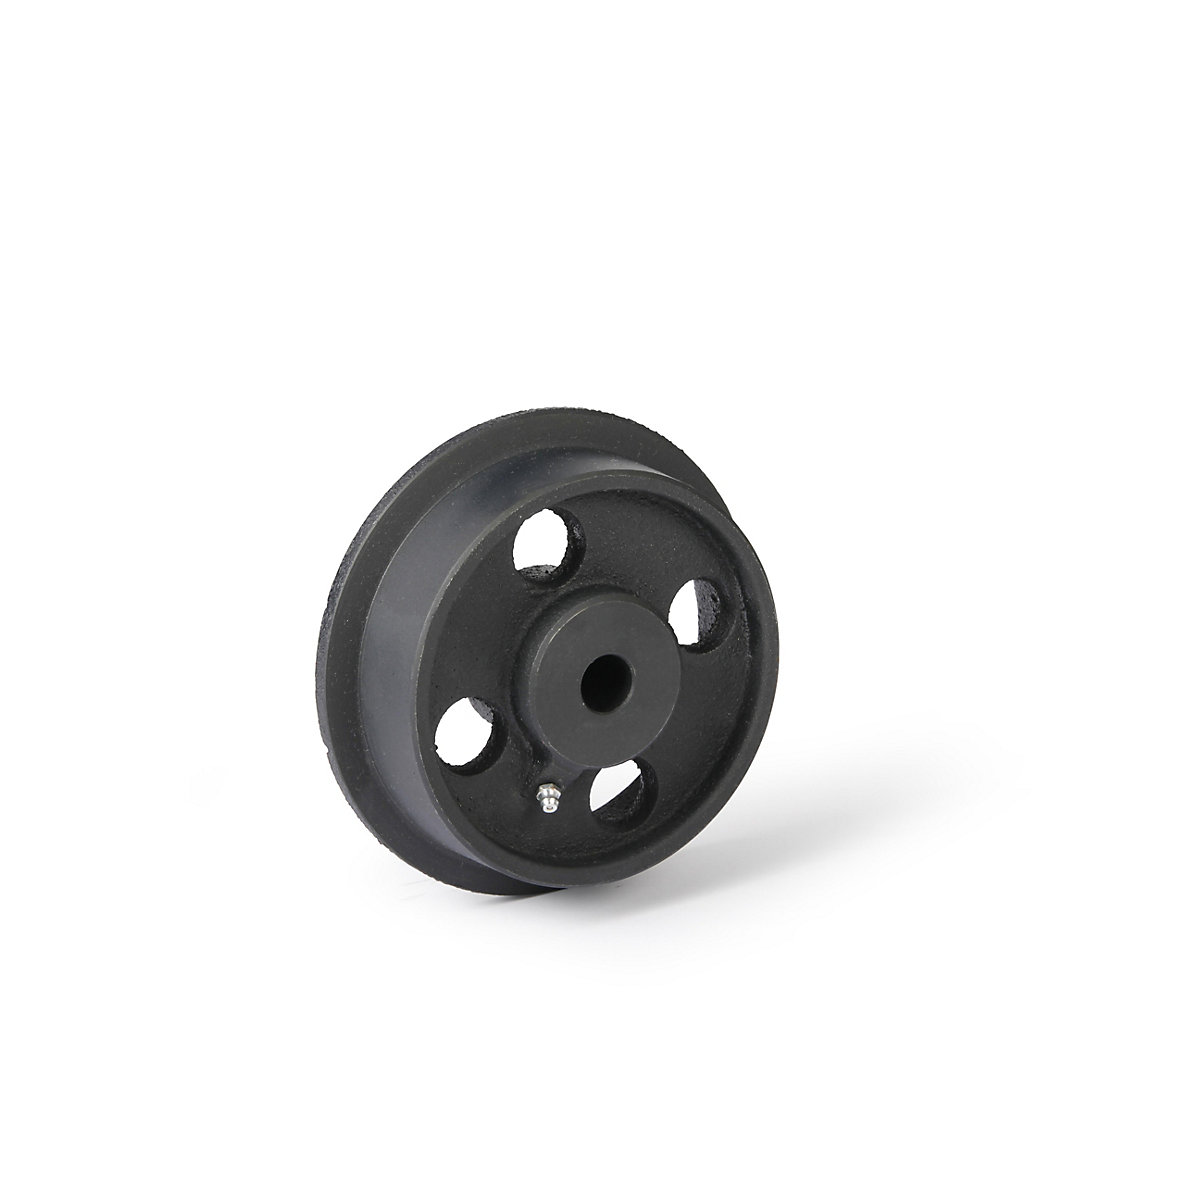 Grey cast iron wheel with flange, plain bearings, wheel Ø with flange 175 mm-6